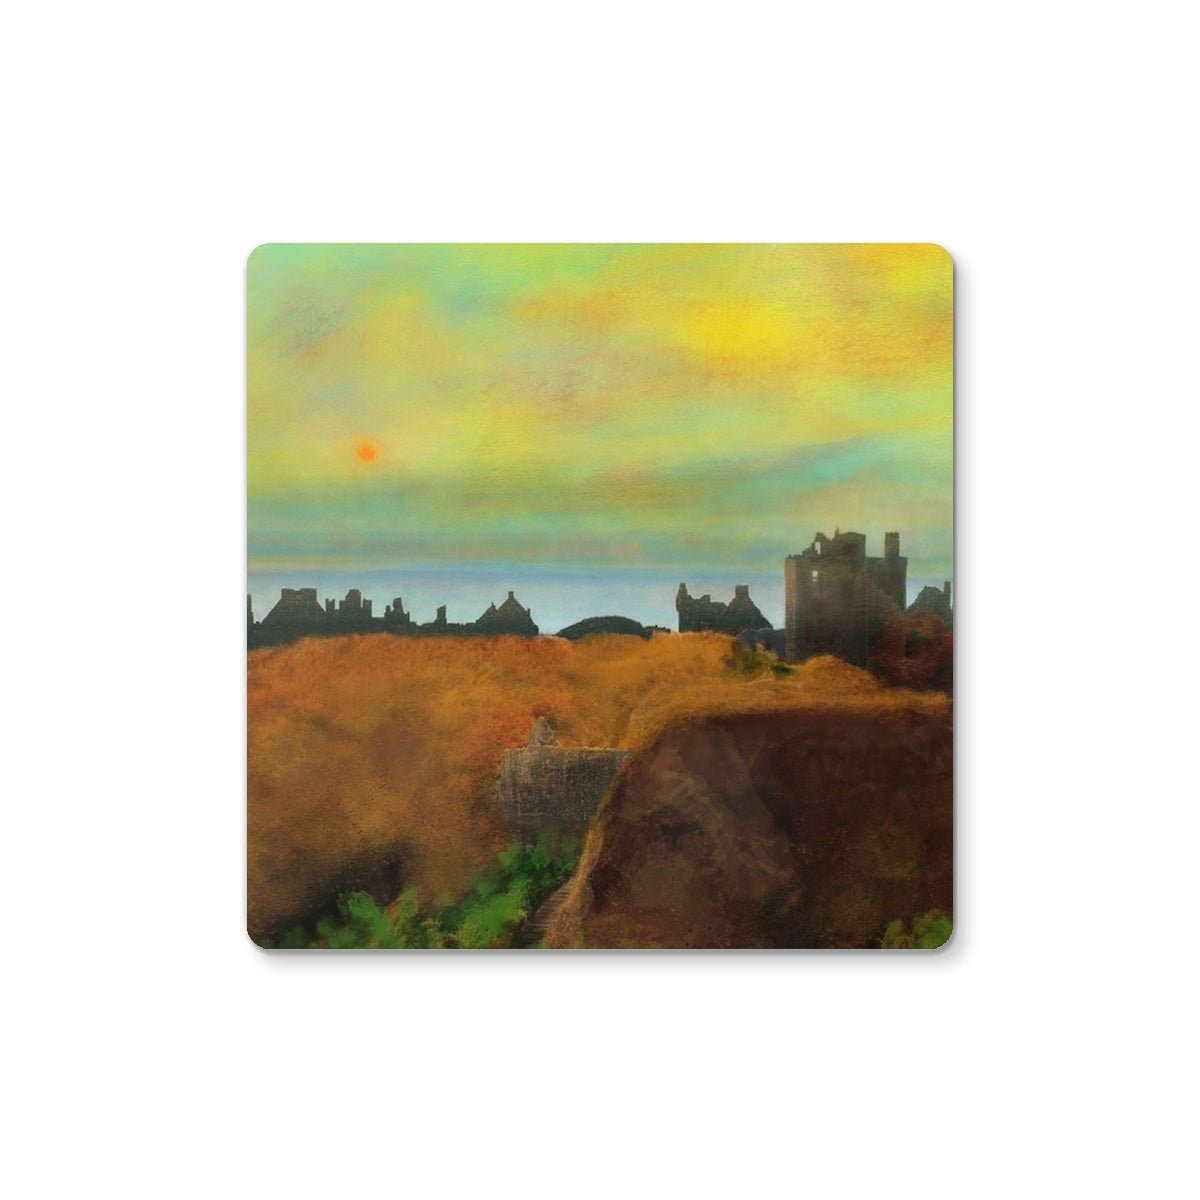 Dunnottar Castle Art Gifts Coaster-Coasters-Historic & Iconic Scotland Art Gallery-2 Coasters-Paintings, Prints, Homeware, Art Gifts From Scotland By Scottish Artist Kevin Hunter